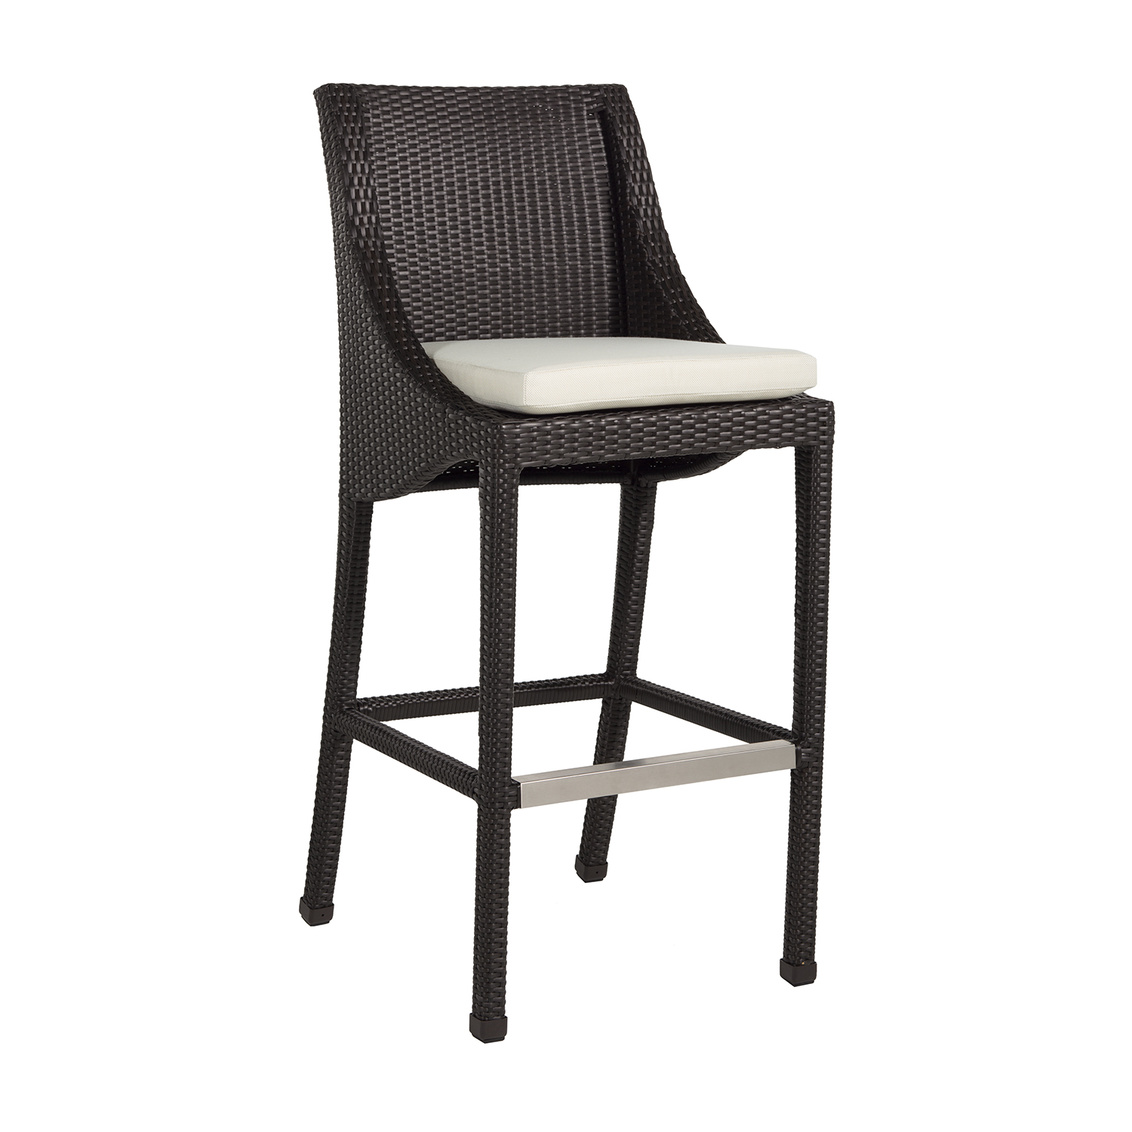 30 inch athena bar stool in black walnut – frame only product image